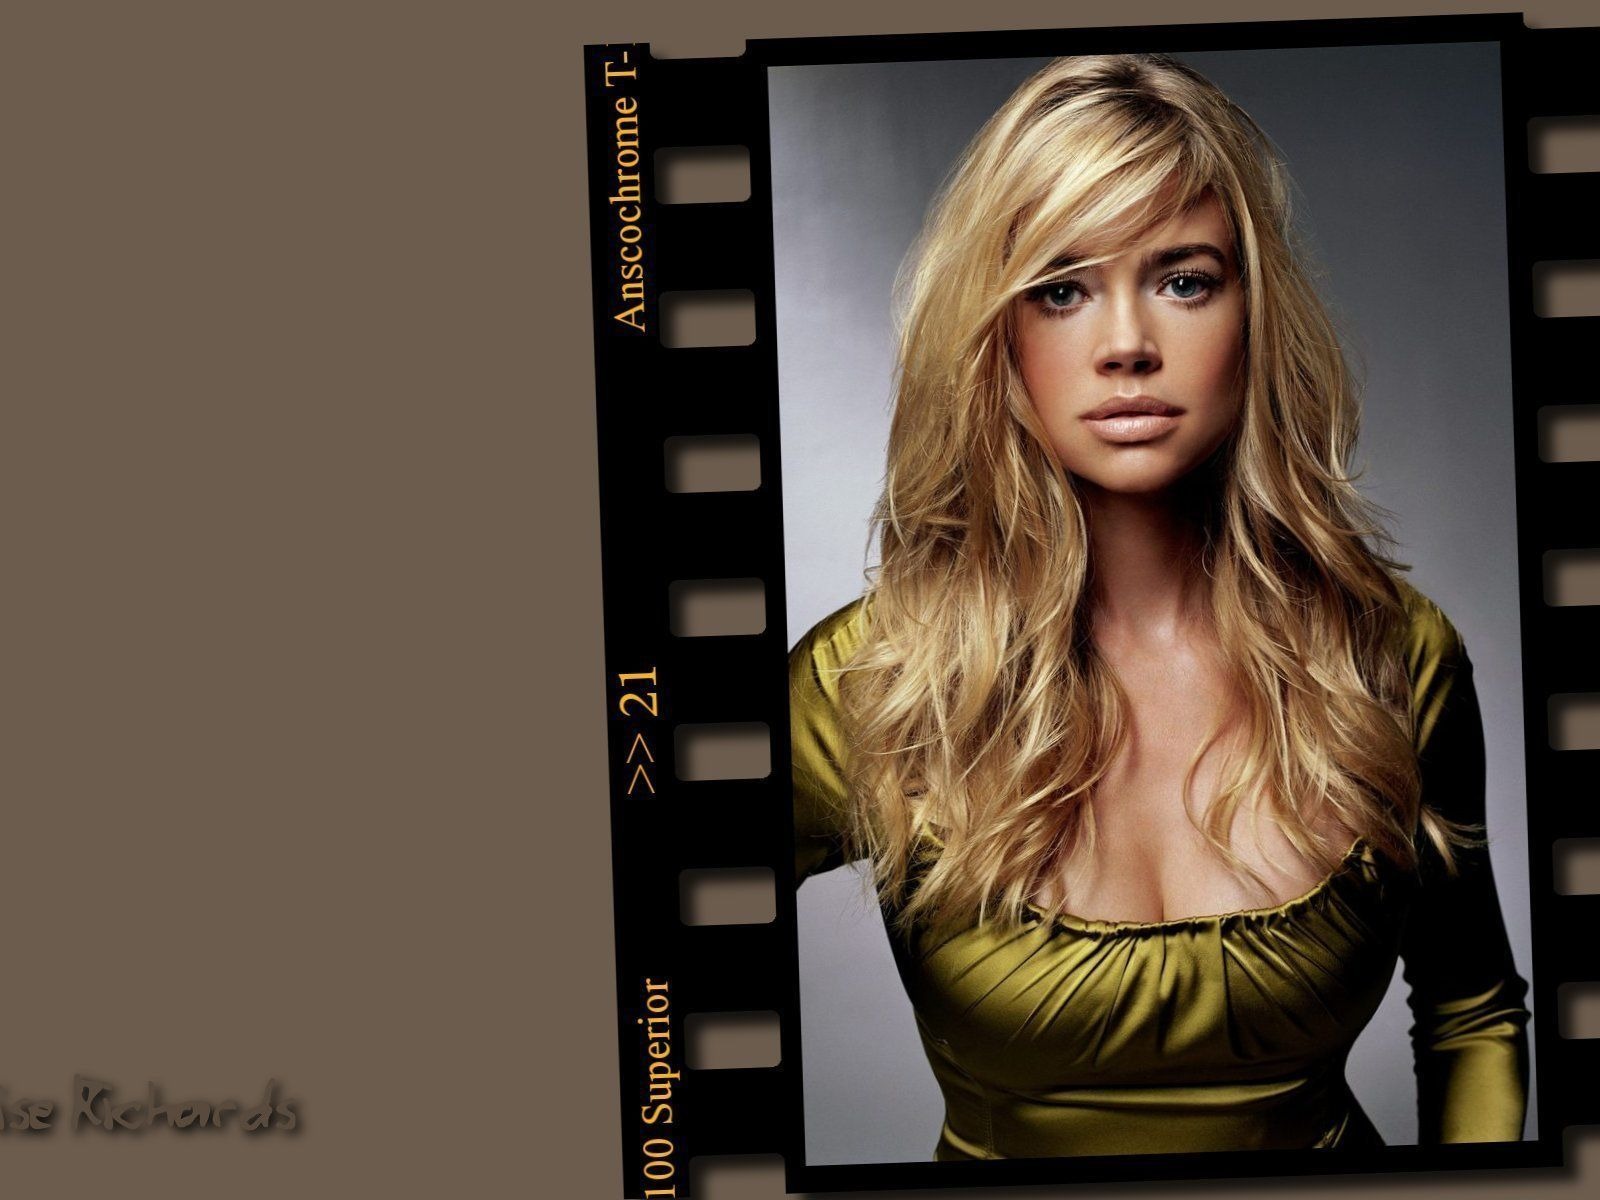 Denise Richards #003 - 1600x1200 Wallpapers Pictures Photos Images